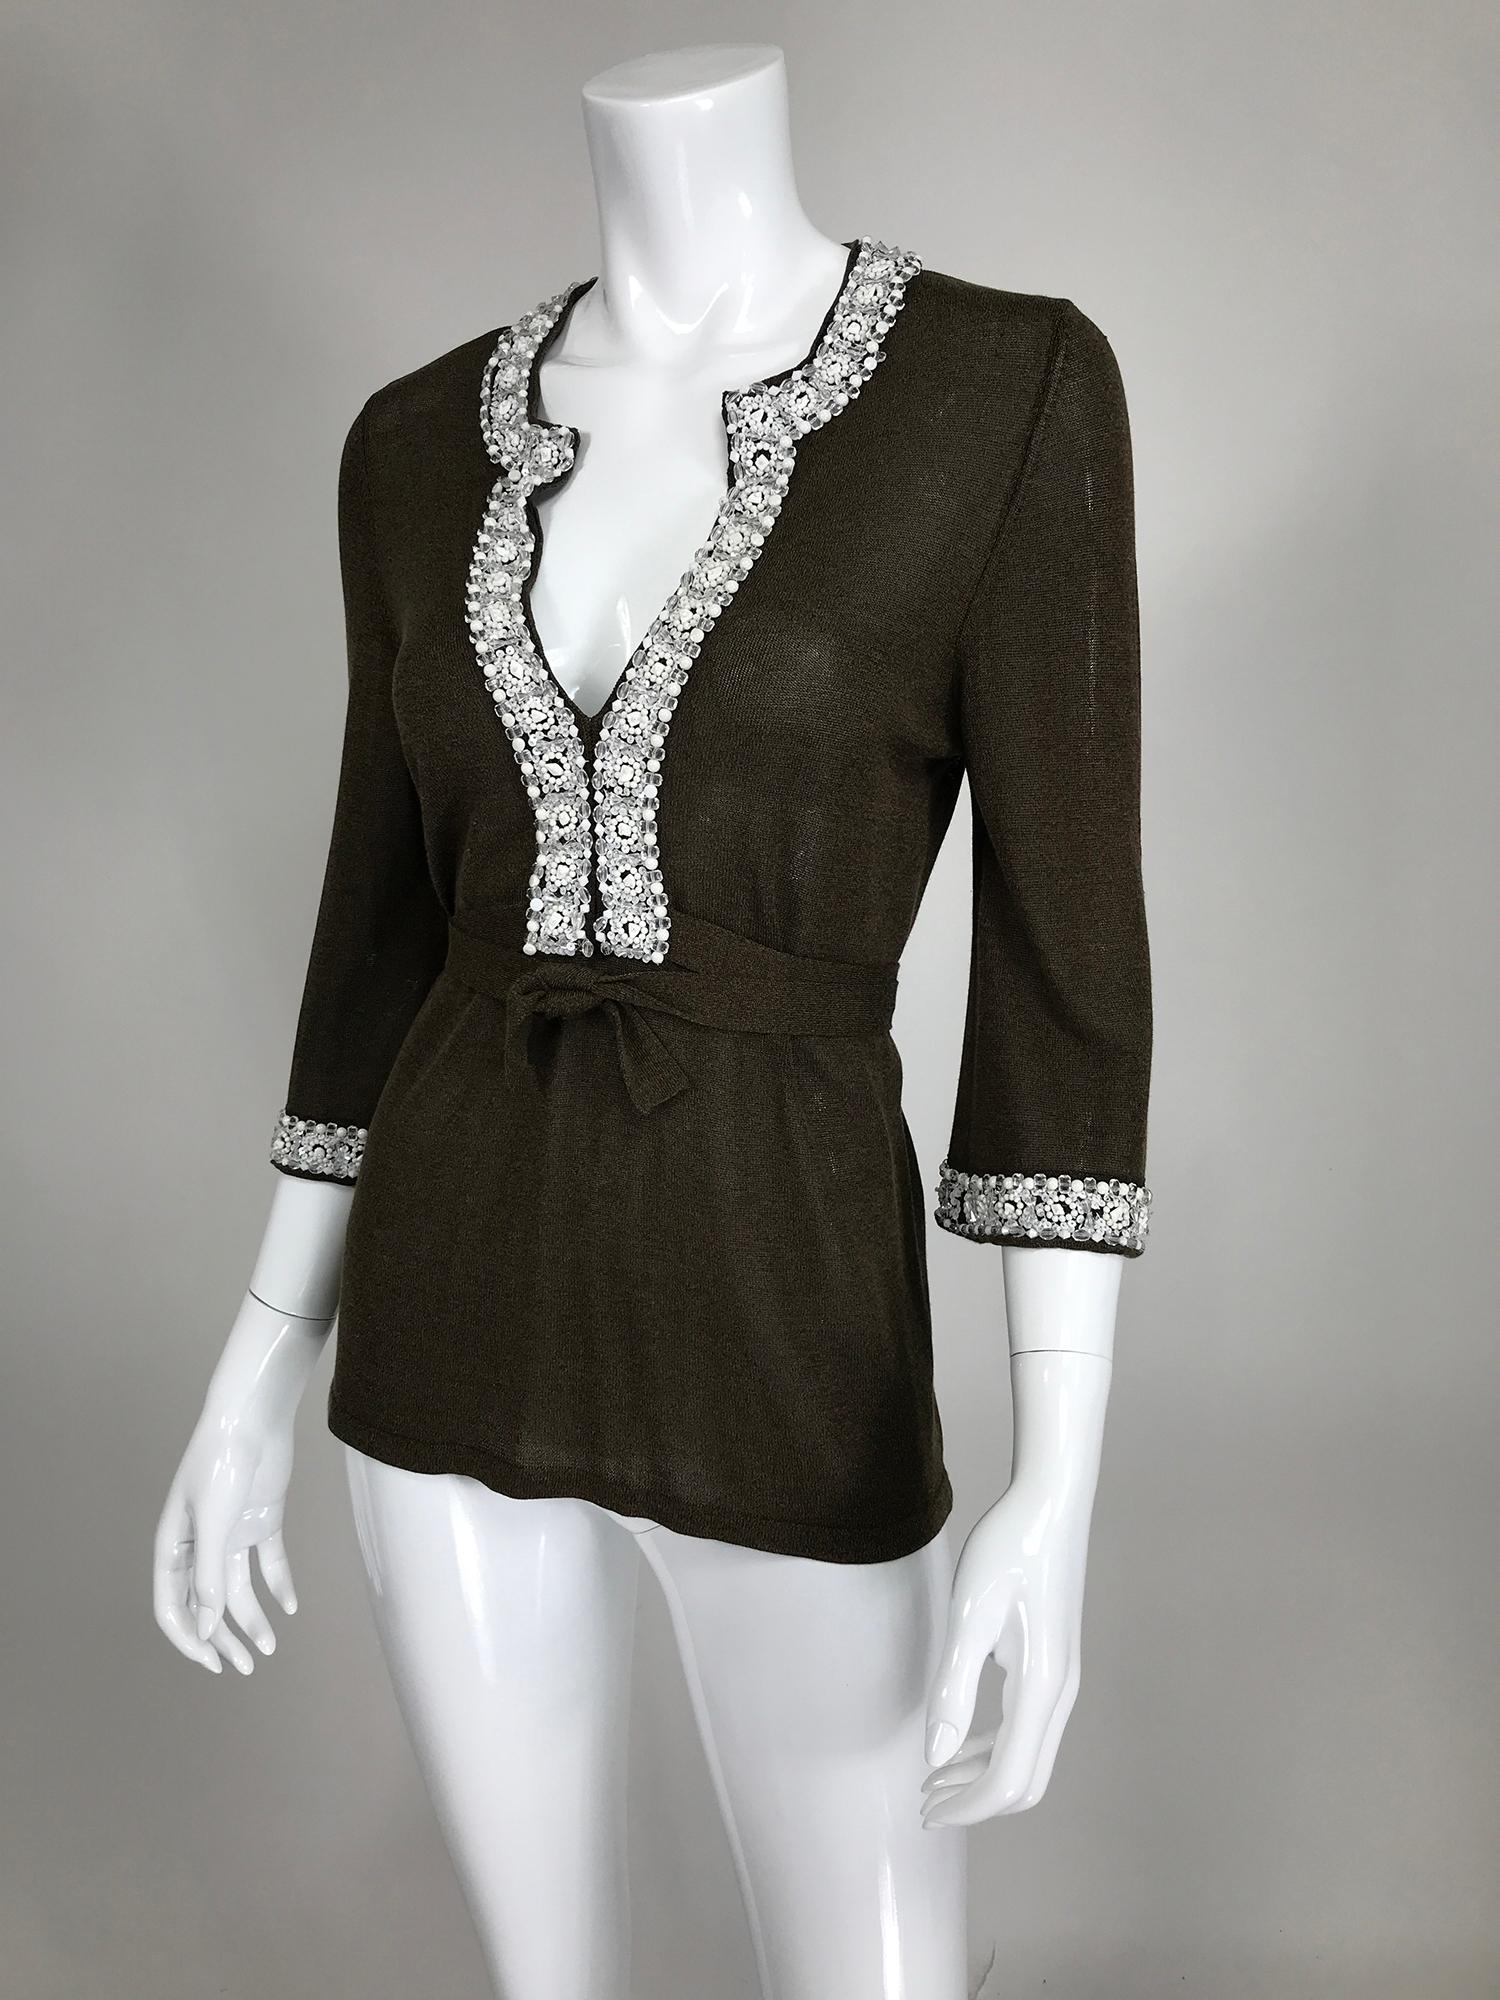 Valentino beaded knit, plunge V neckline top in brown. White & crystal beads and sequins trim the neckline and cuffs. Pull on top has 3/4 length sleeves and waist wraps. Silky rayon knit. Unlined. Marked size 42/6. 
     In excellent wearable